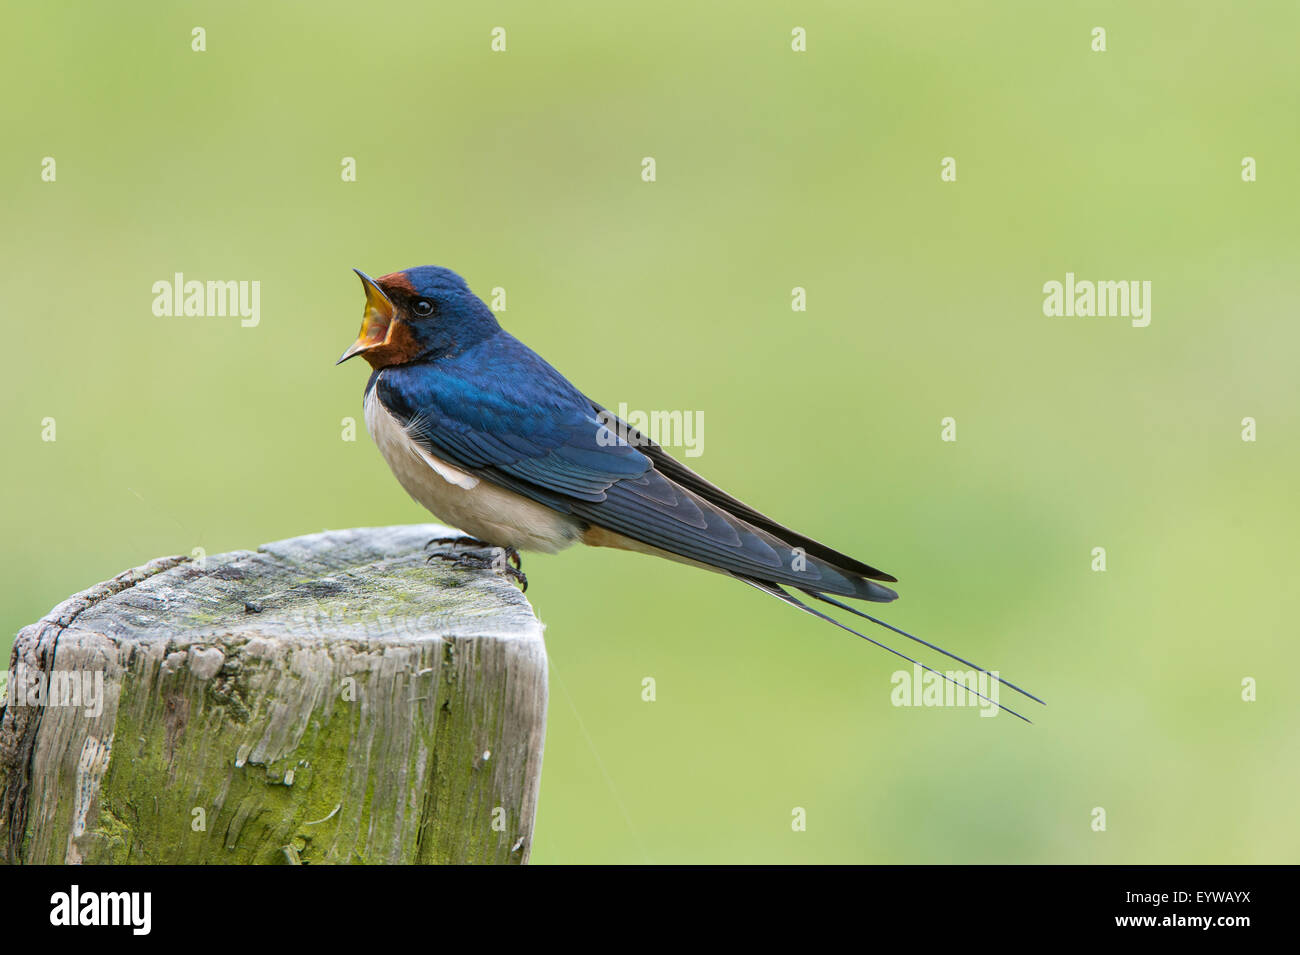 Barn Swallow (Hirundo rustica) perched on wooden post, Hesse, Germany Stock Photo